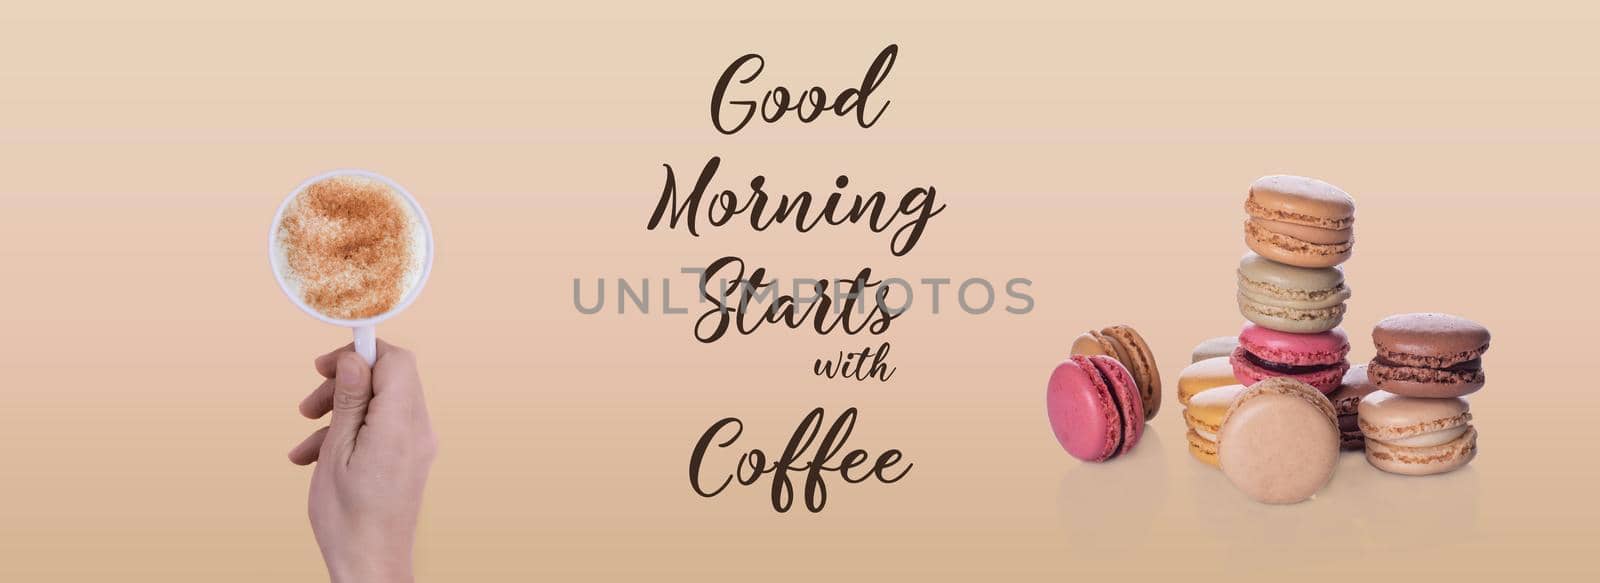 banner of hand holding a cup of coffee, macaroons and inscription Good morning starts with coffee on beige background